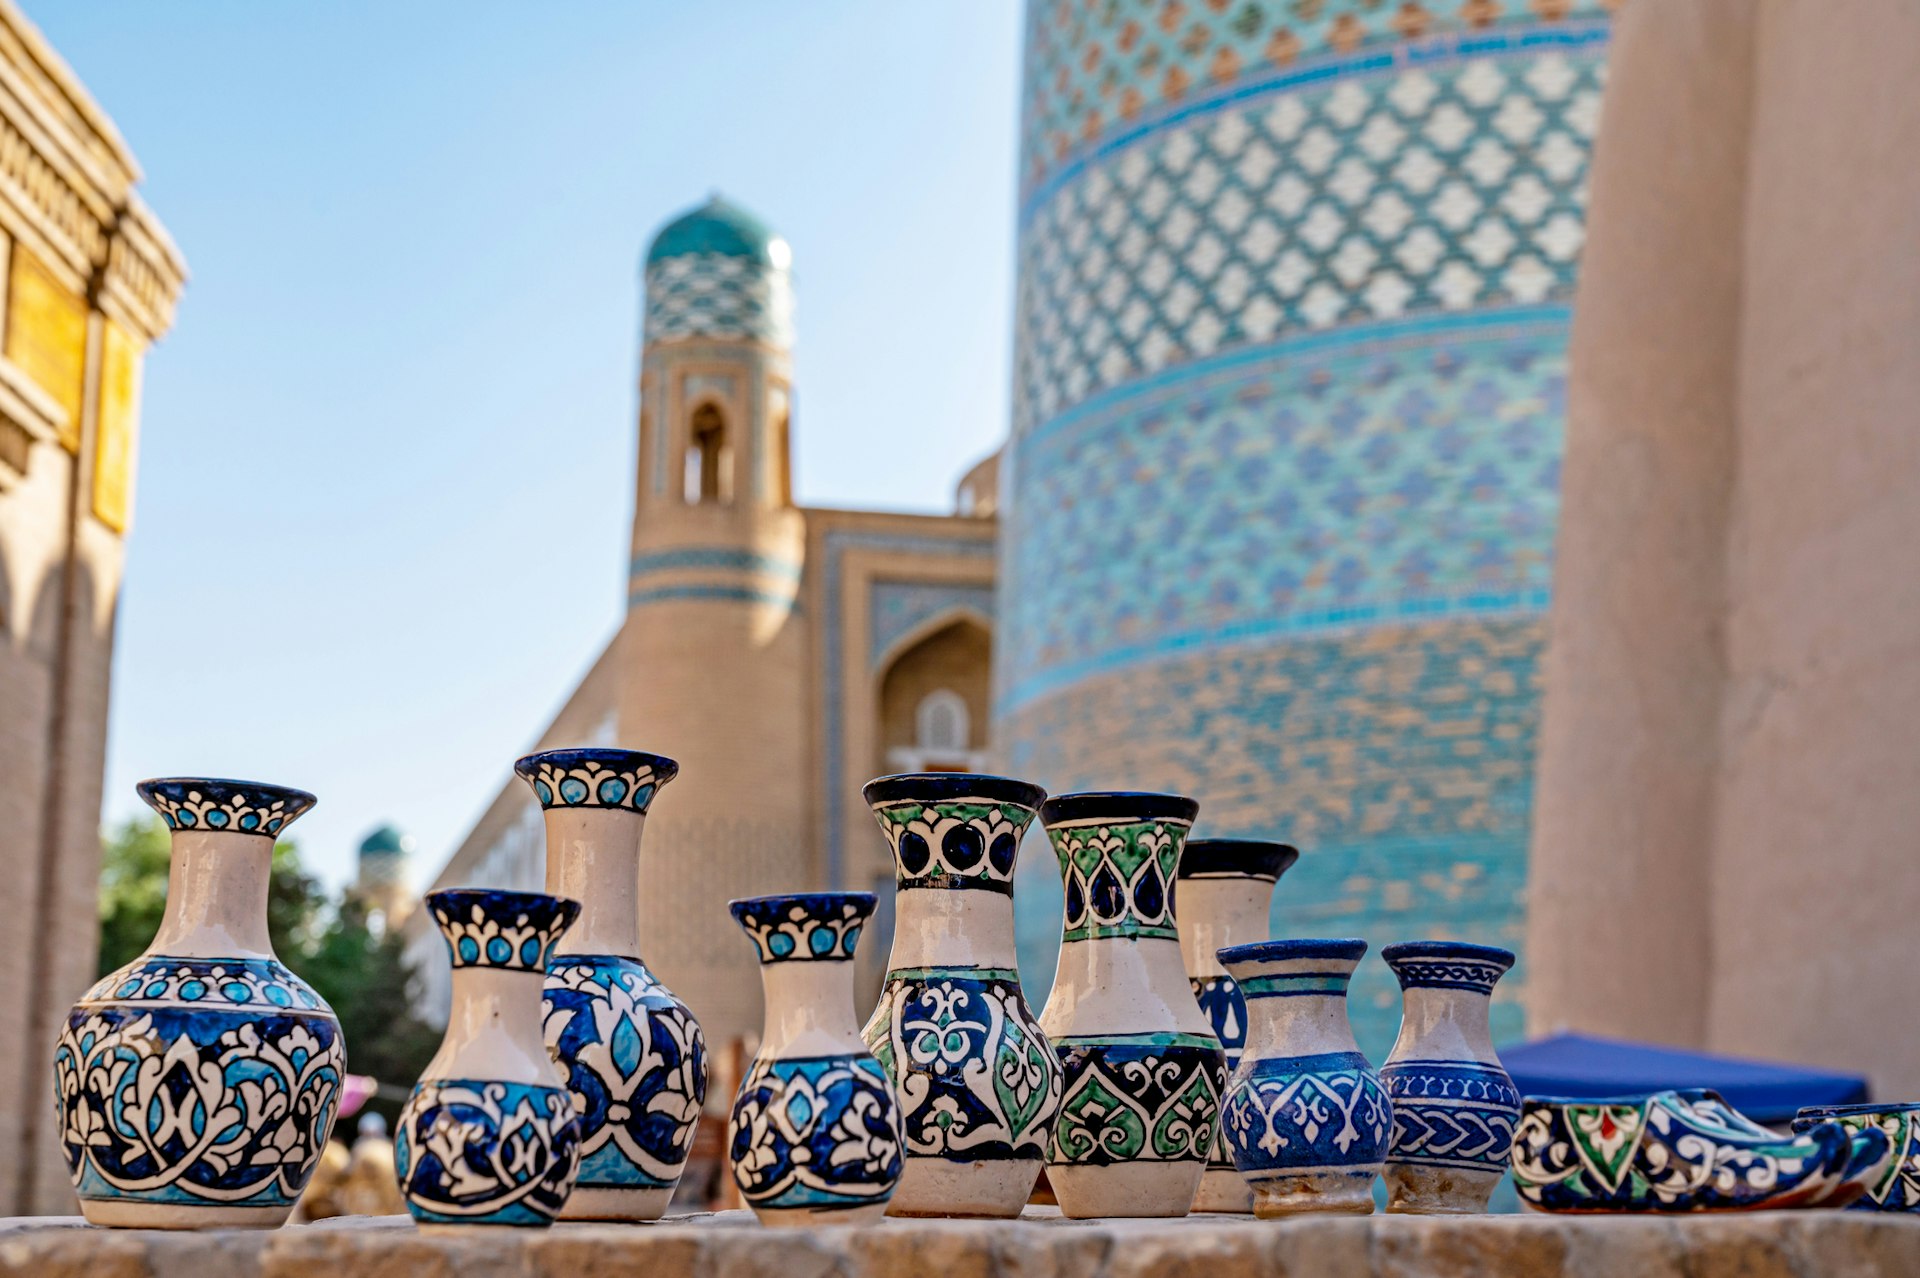 A row of small ceramic pots with intricate blue-and-white glazed patterns on them in front of a large tiled building